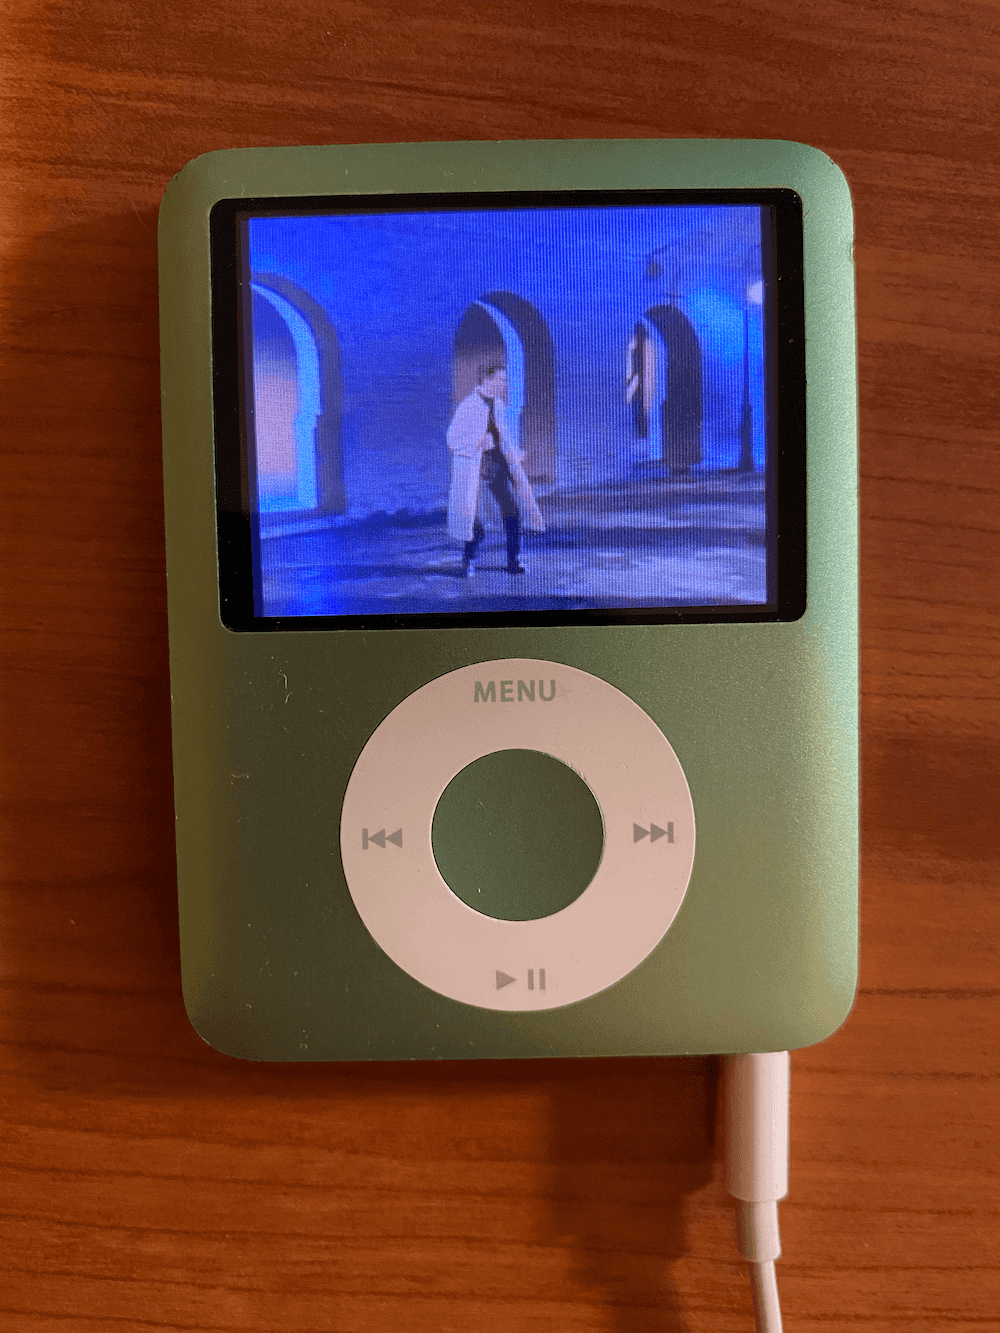 An photo of a mint green iPod nano with a video playing